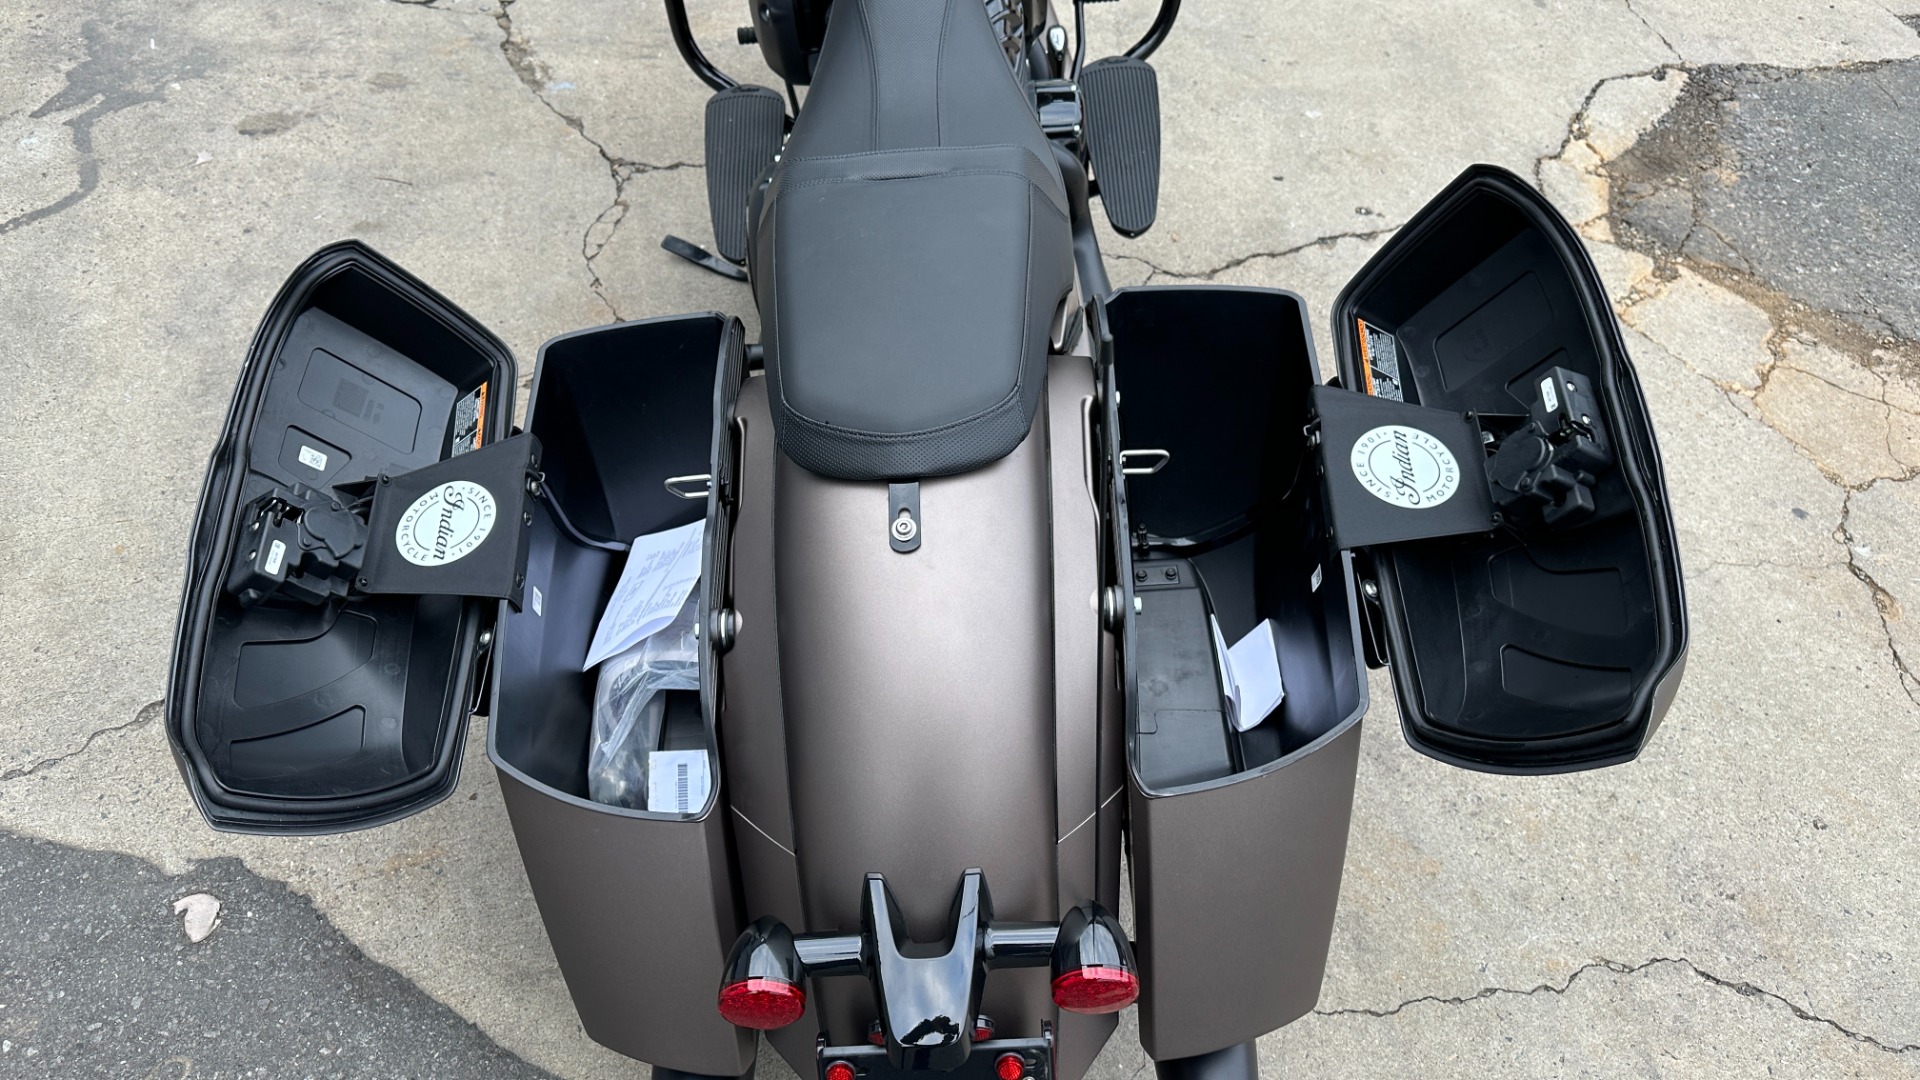 Used 2019 INDIAN CHIEFTAIN DARK HORSE / MATTE PAINT / LOW MILES / NAV / CRUISE CONTROL / TOUCHSCREEN for sale Sold at Formula Imports in Charlotte NC 28227 6